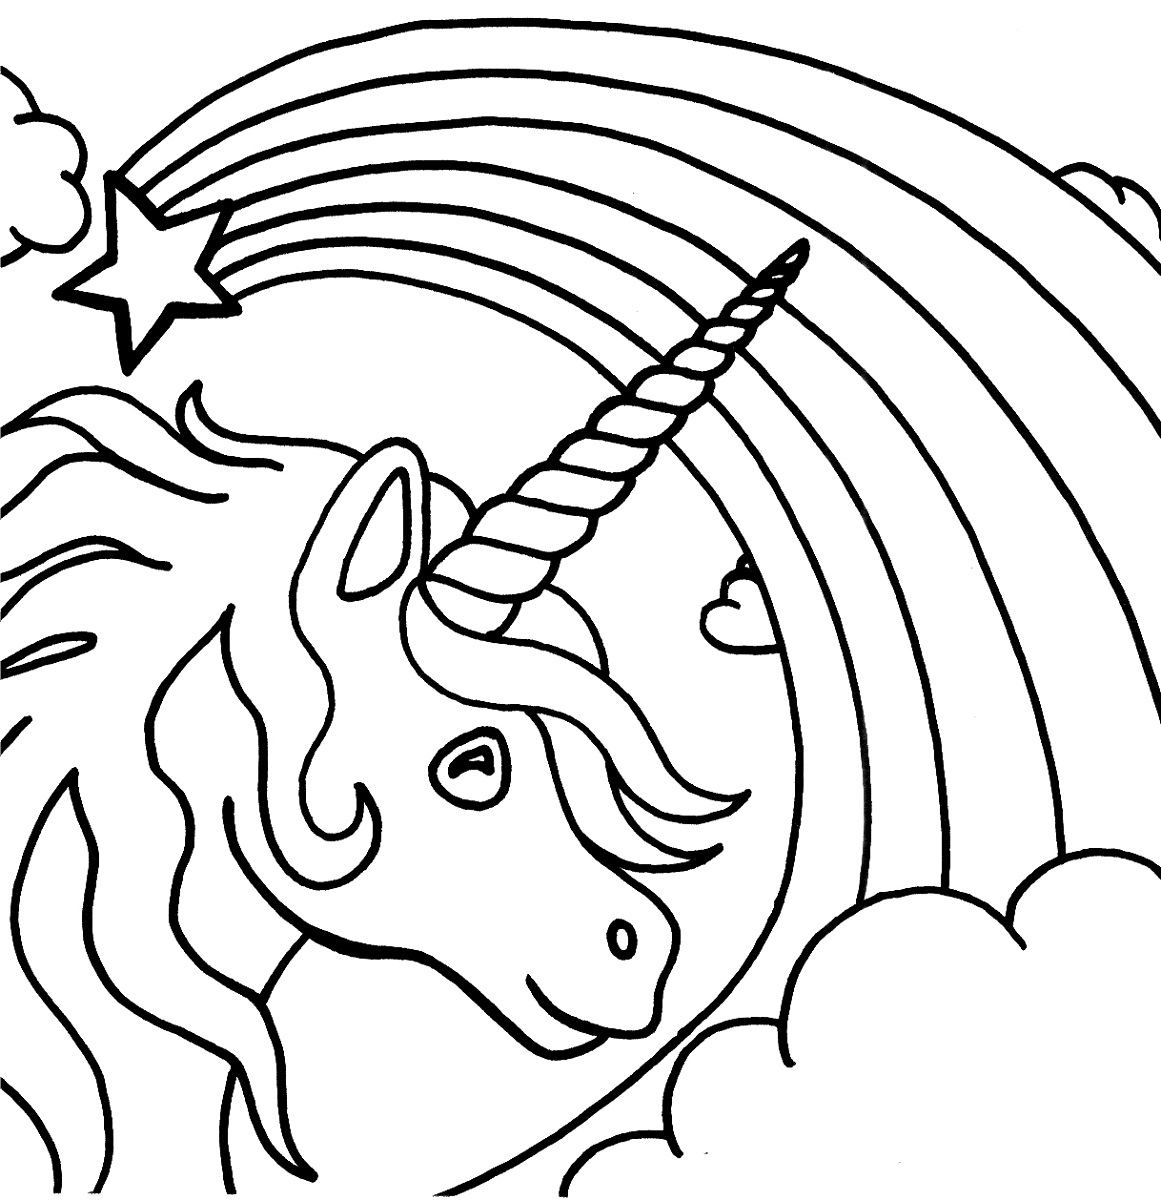 free-activity-pages-for-kids-unicorn